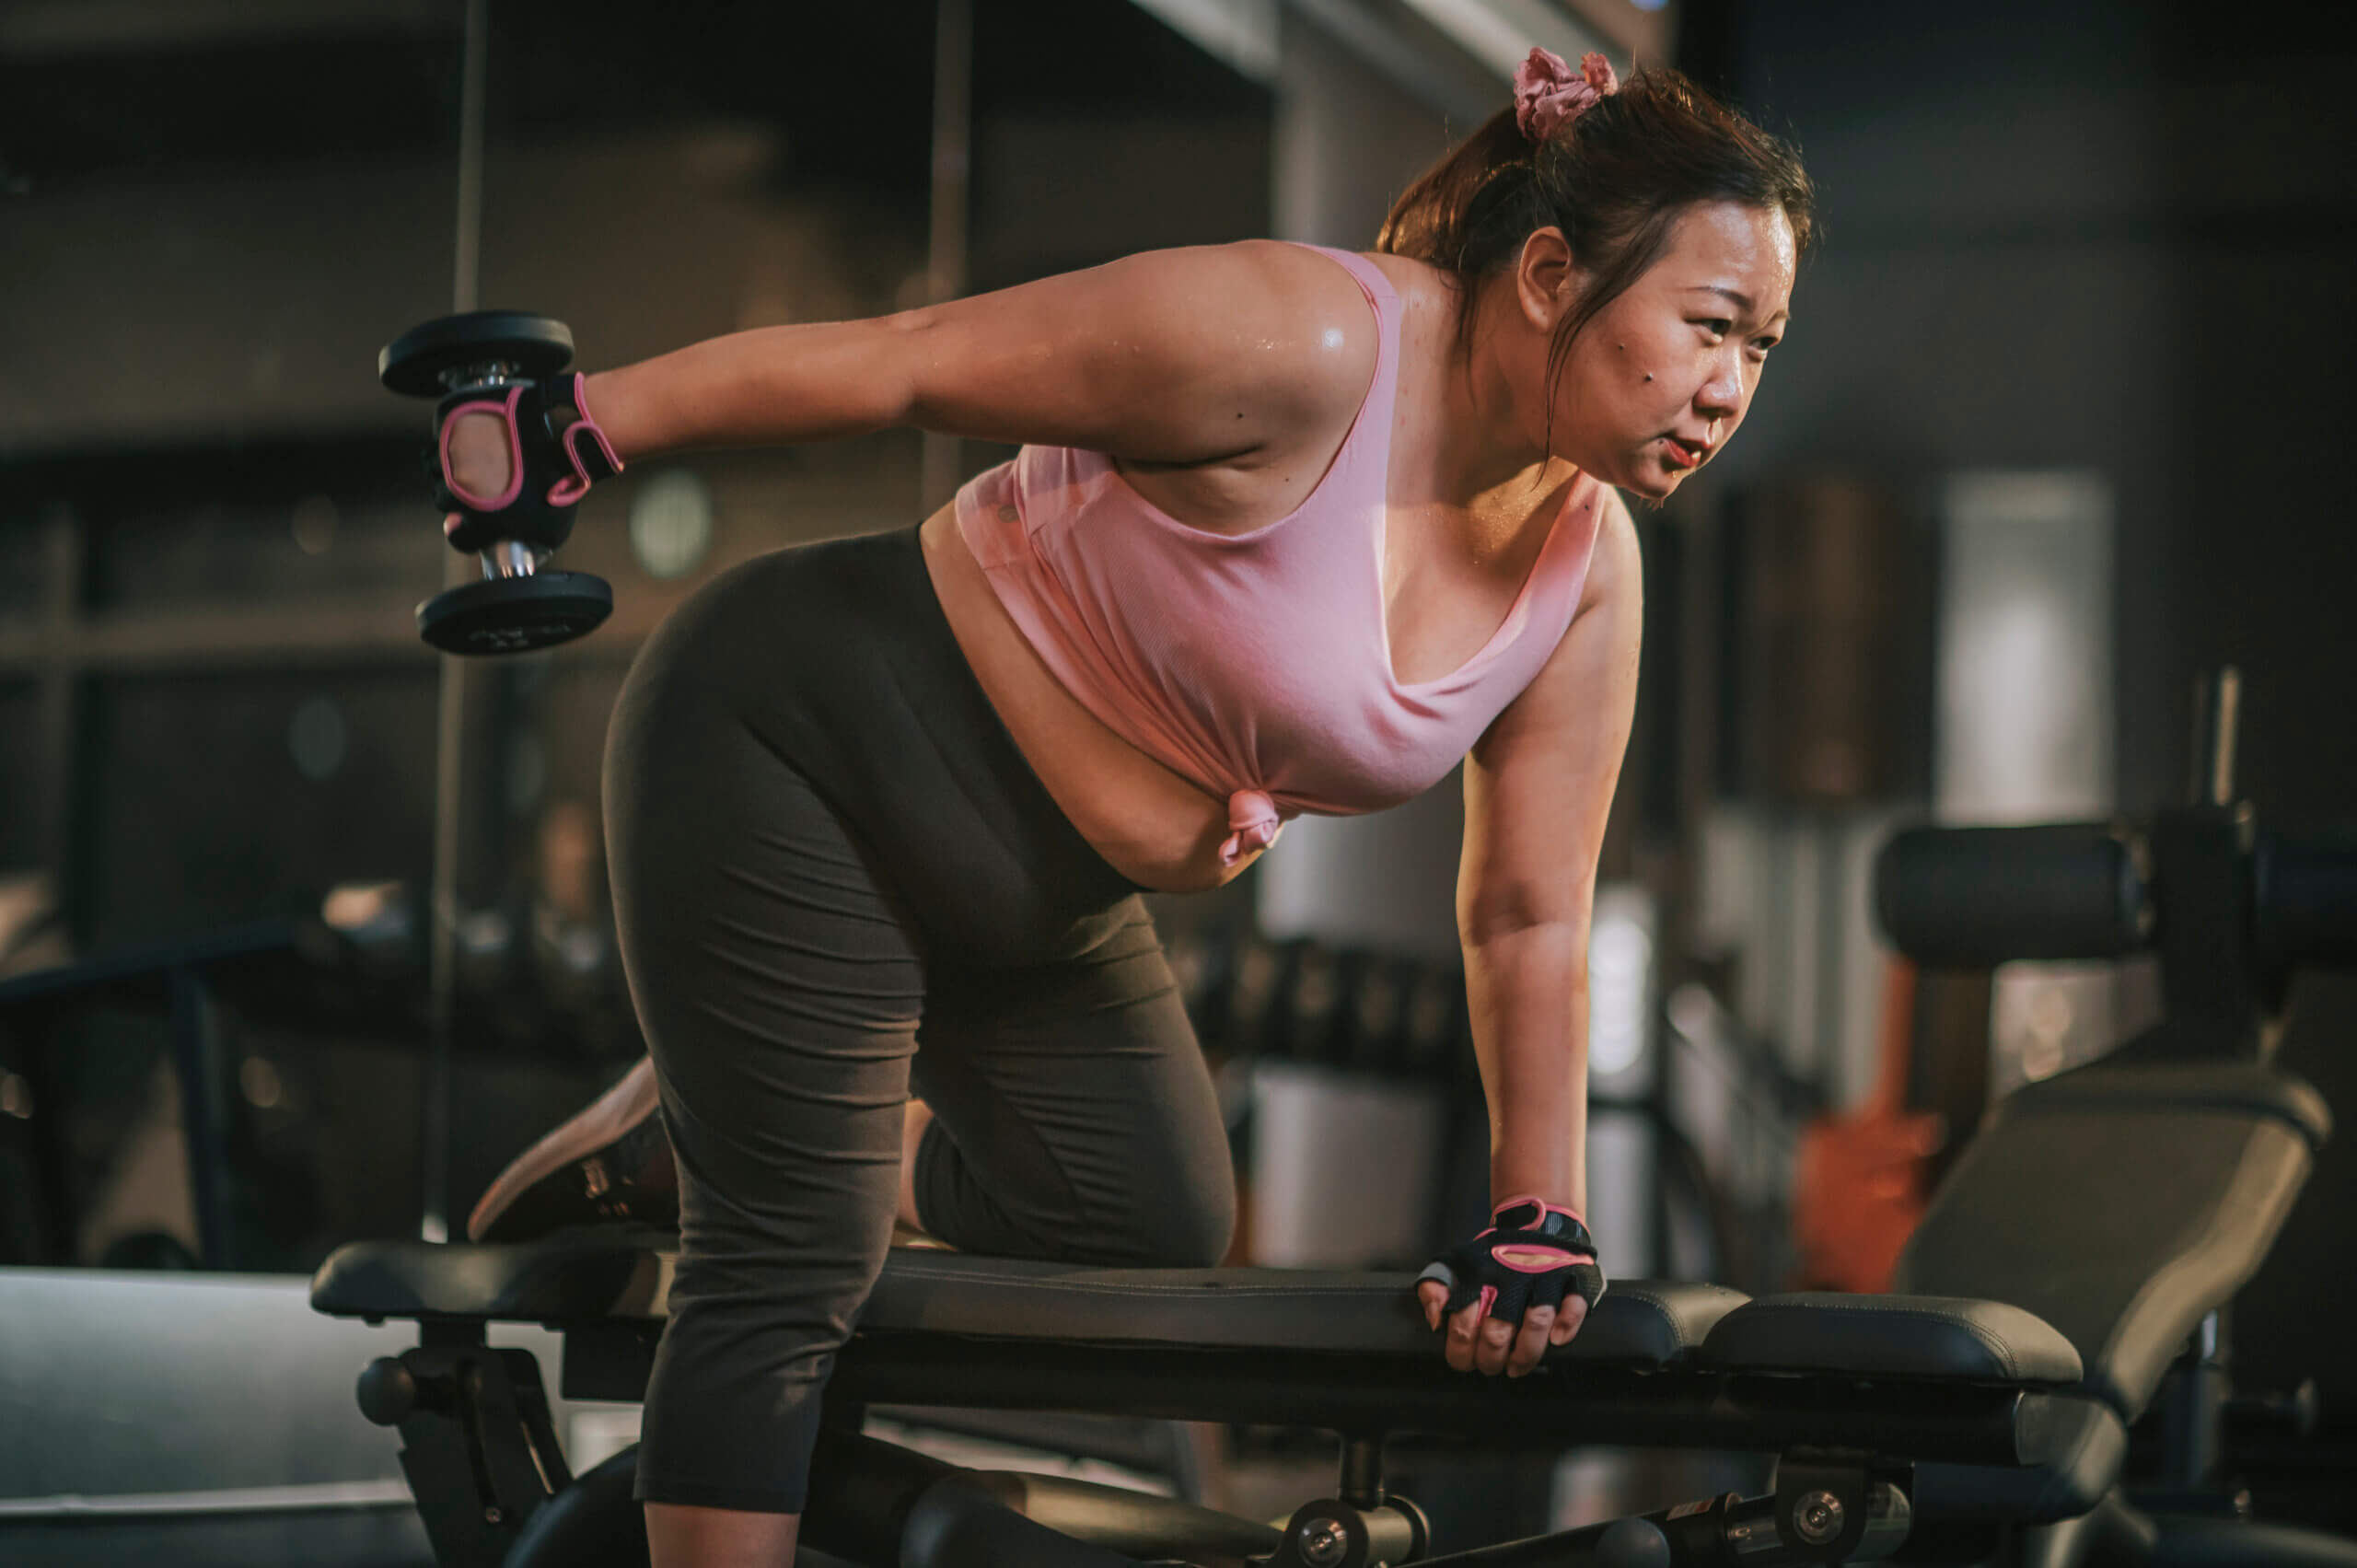 woman using dumbbells in a lunge position at gym at night